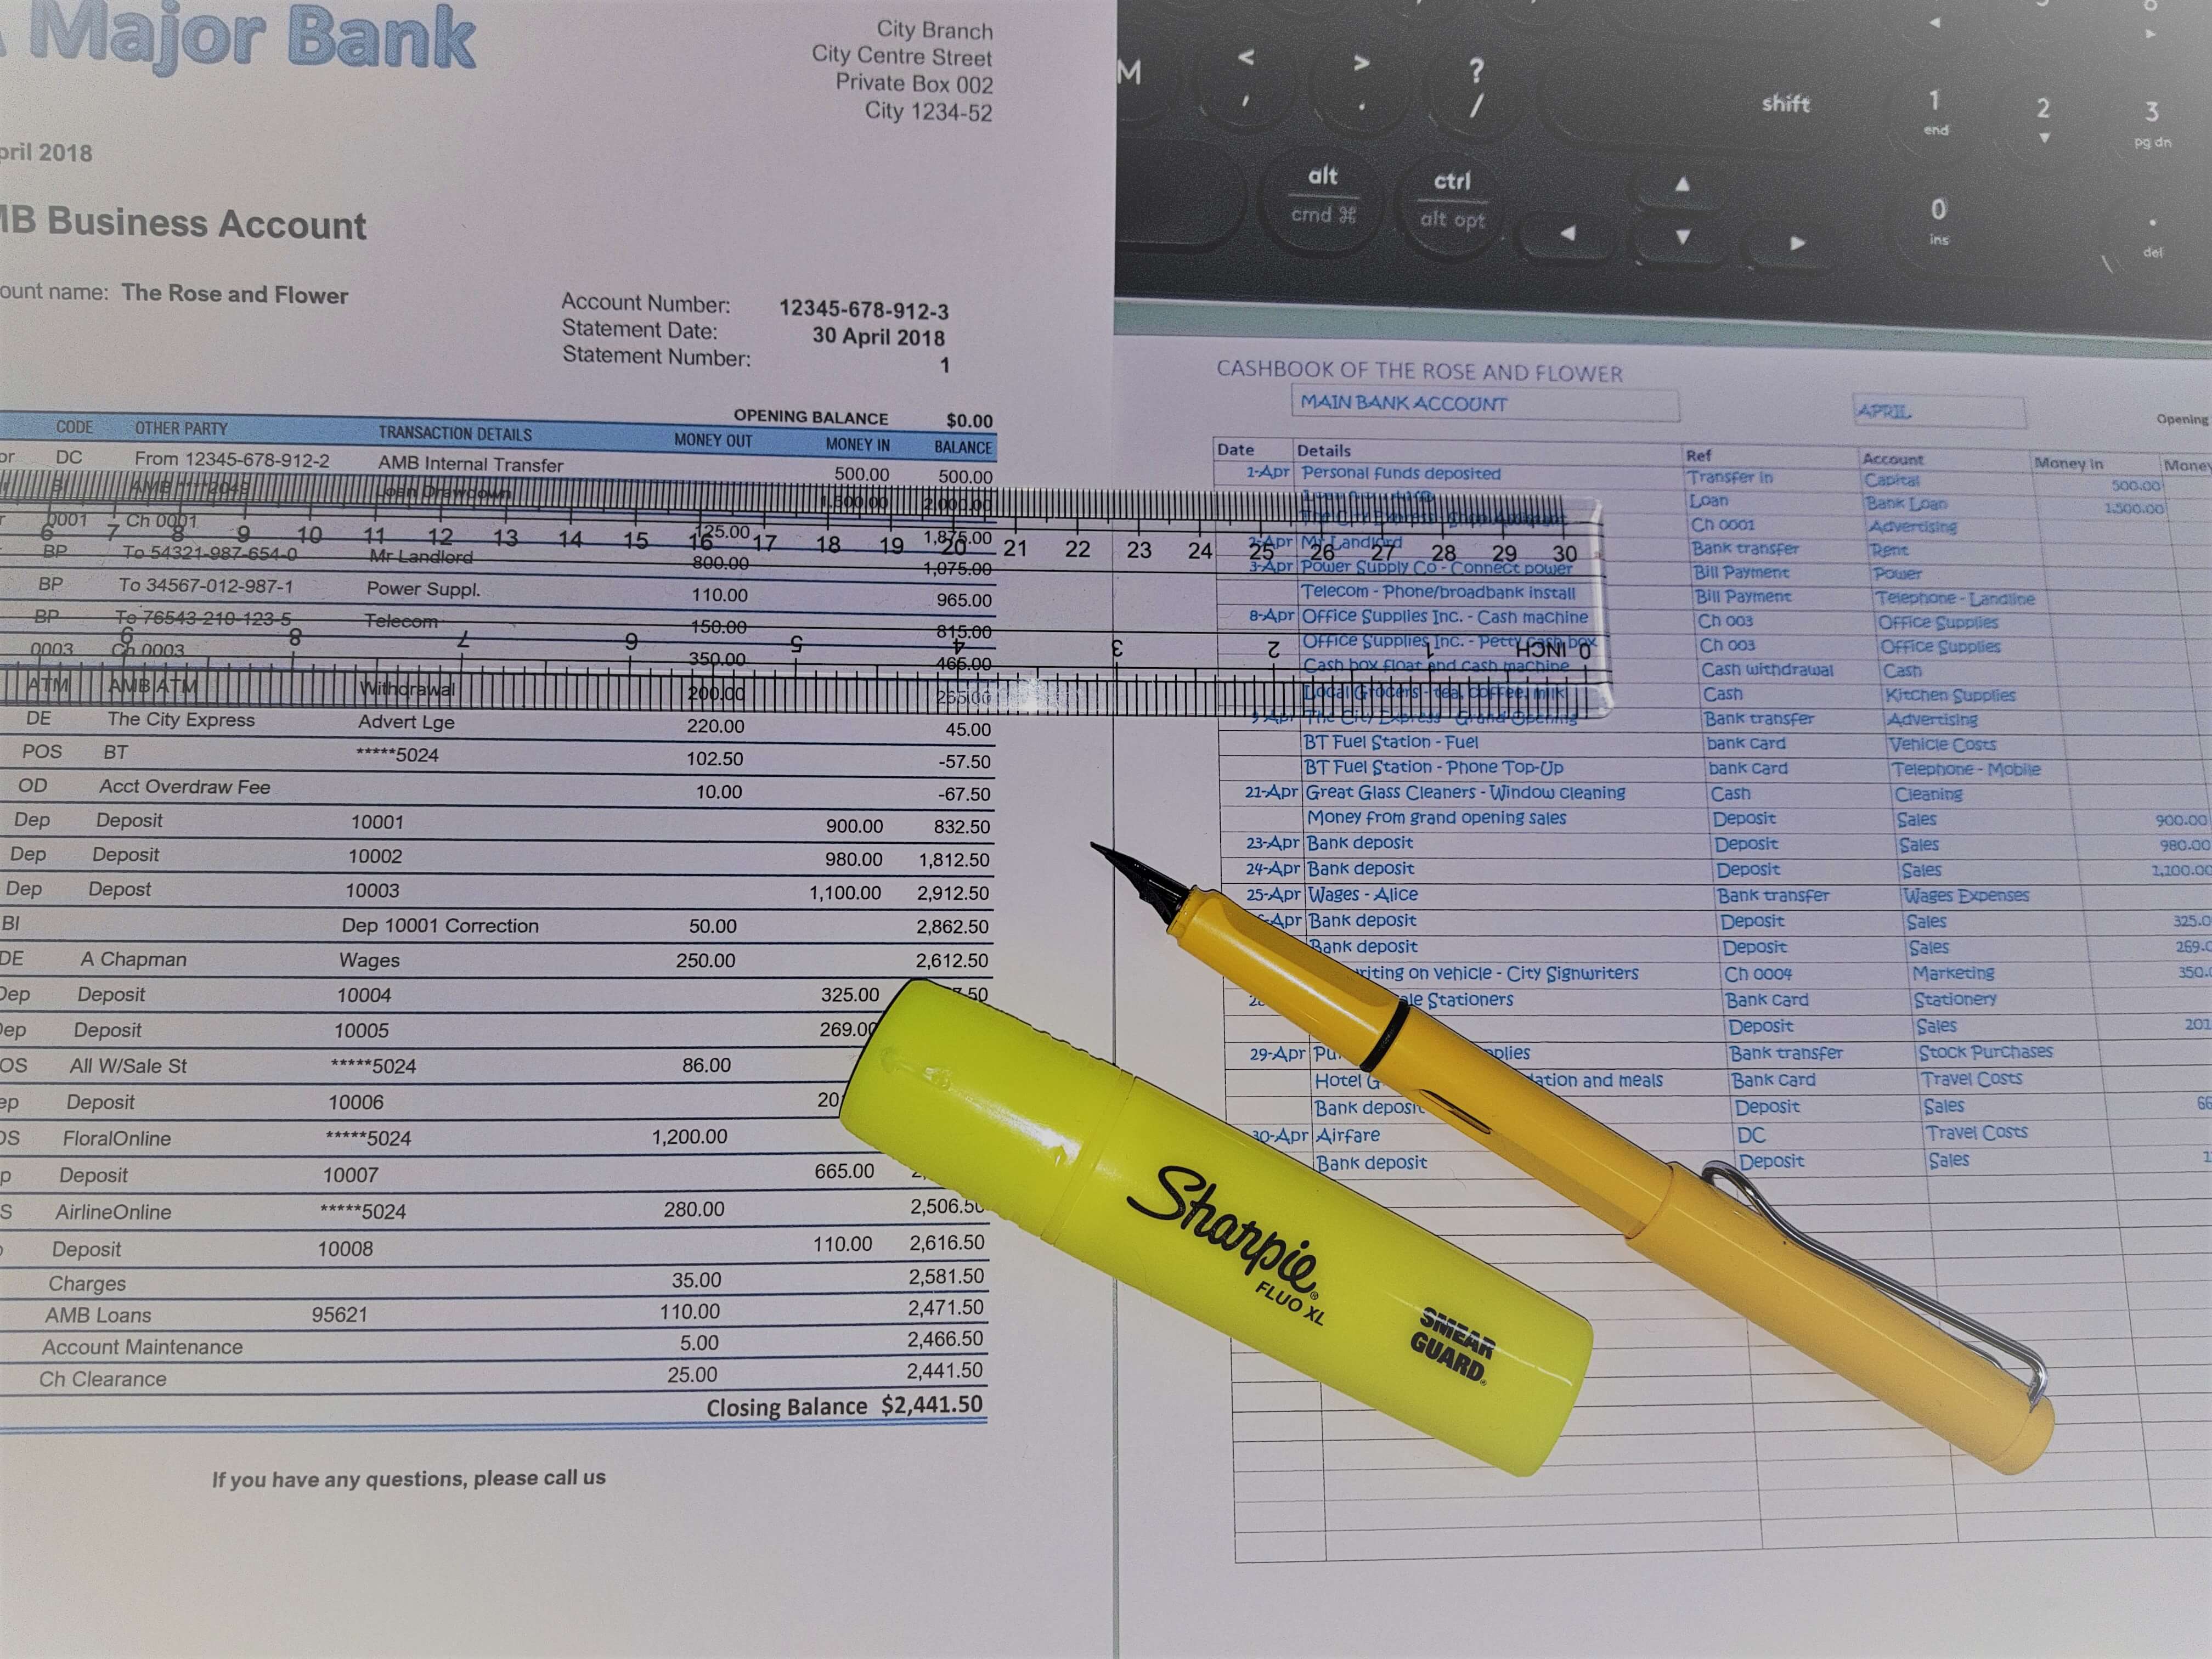 Bank statement and cashbook side by side to match transactions or highlight differences.